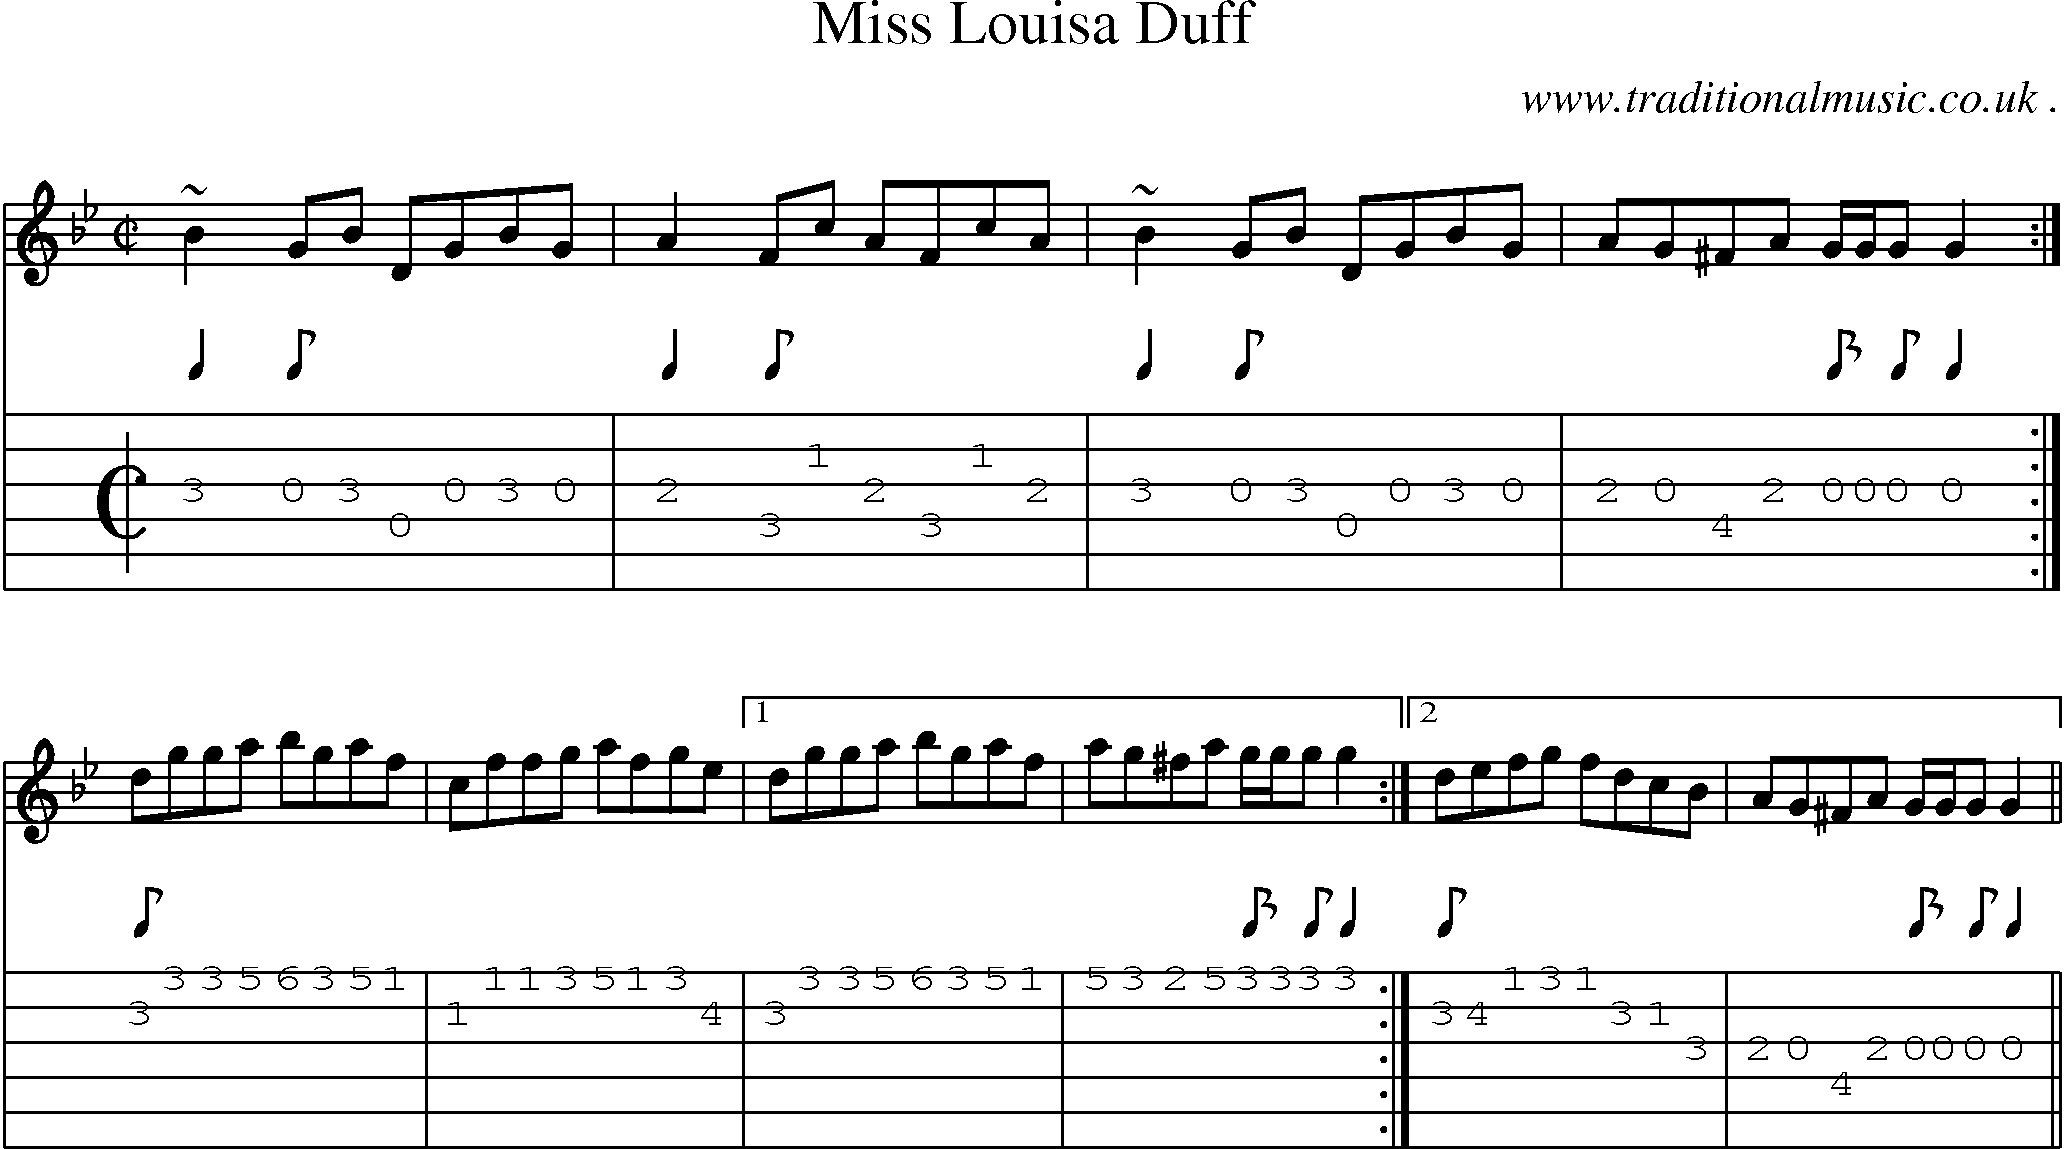 Sheet-music  score, Chords and Guitar Tabs for Miss Louisa Duff